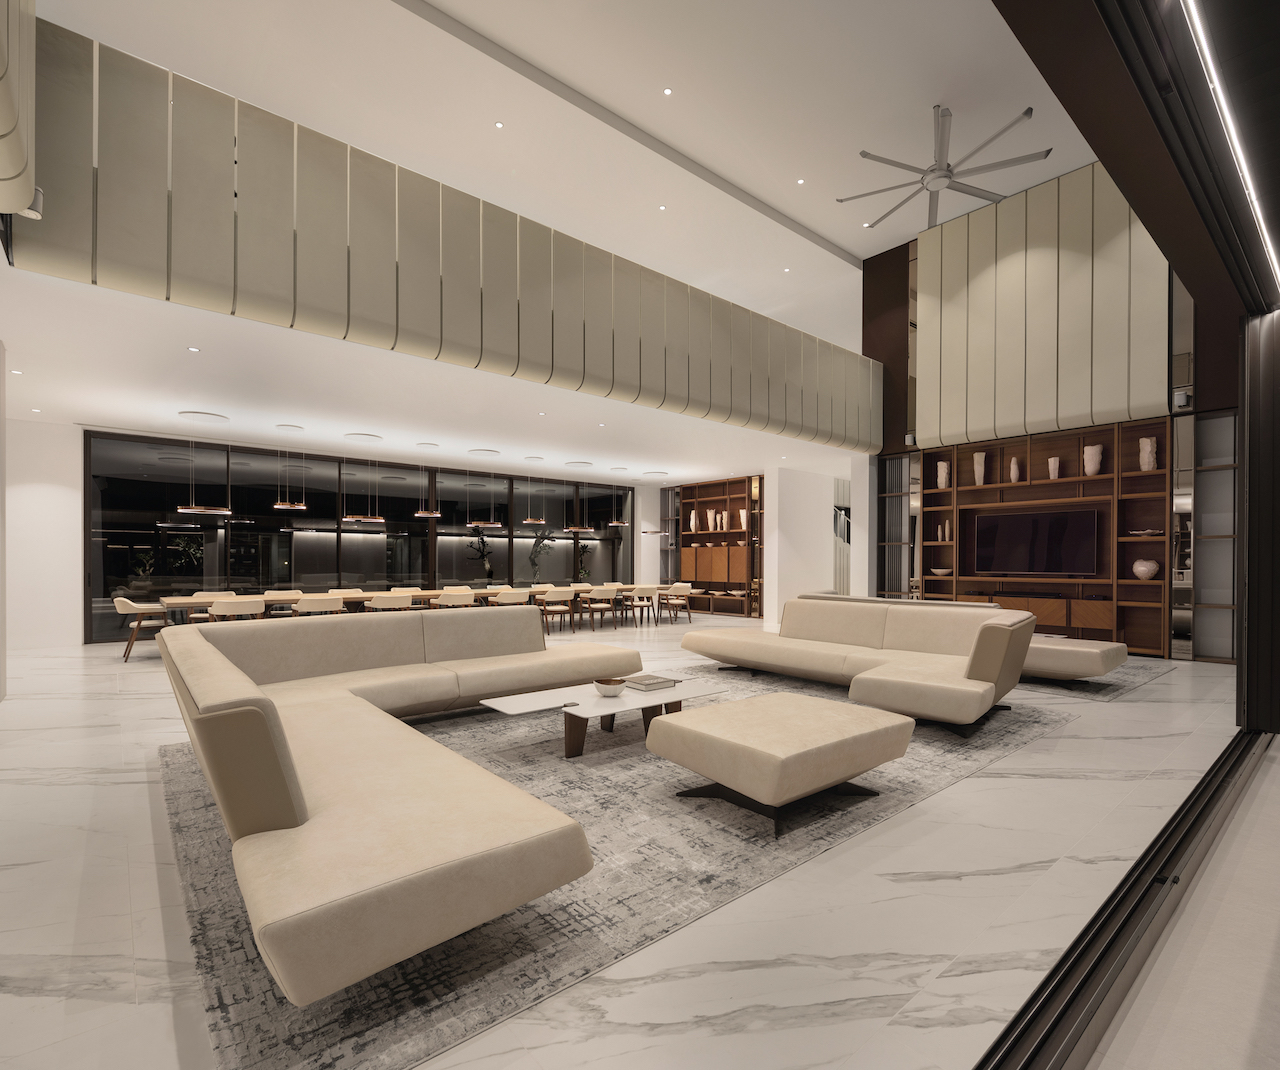 The Art of Designing Luxurious Spaces by Artalenta